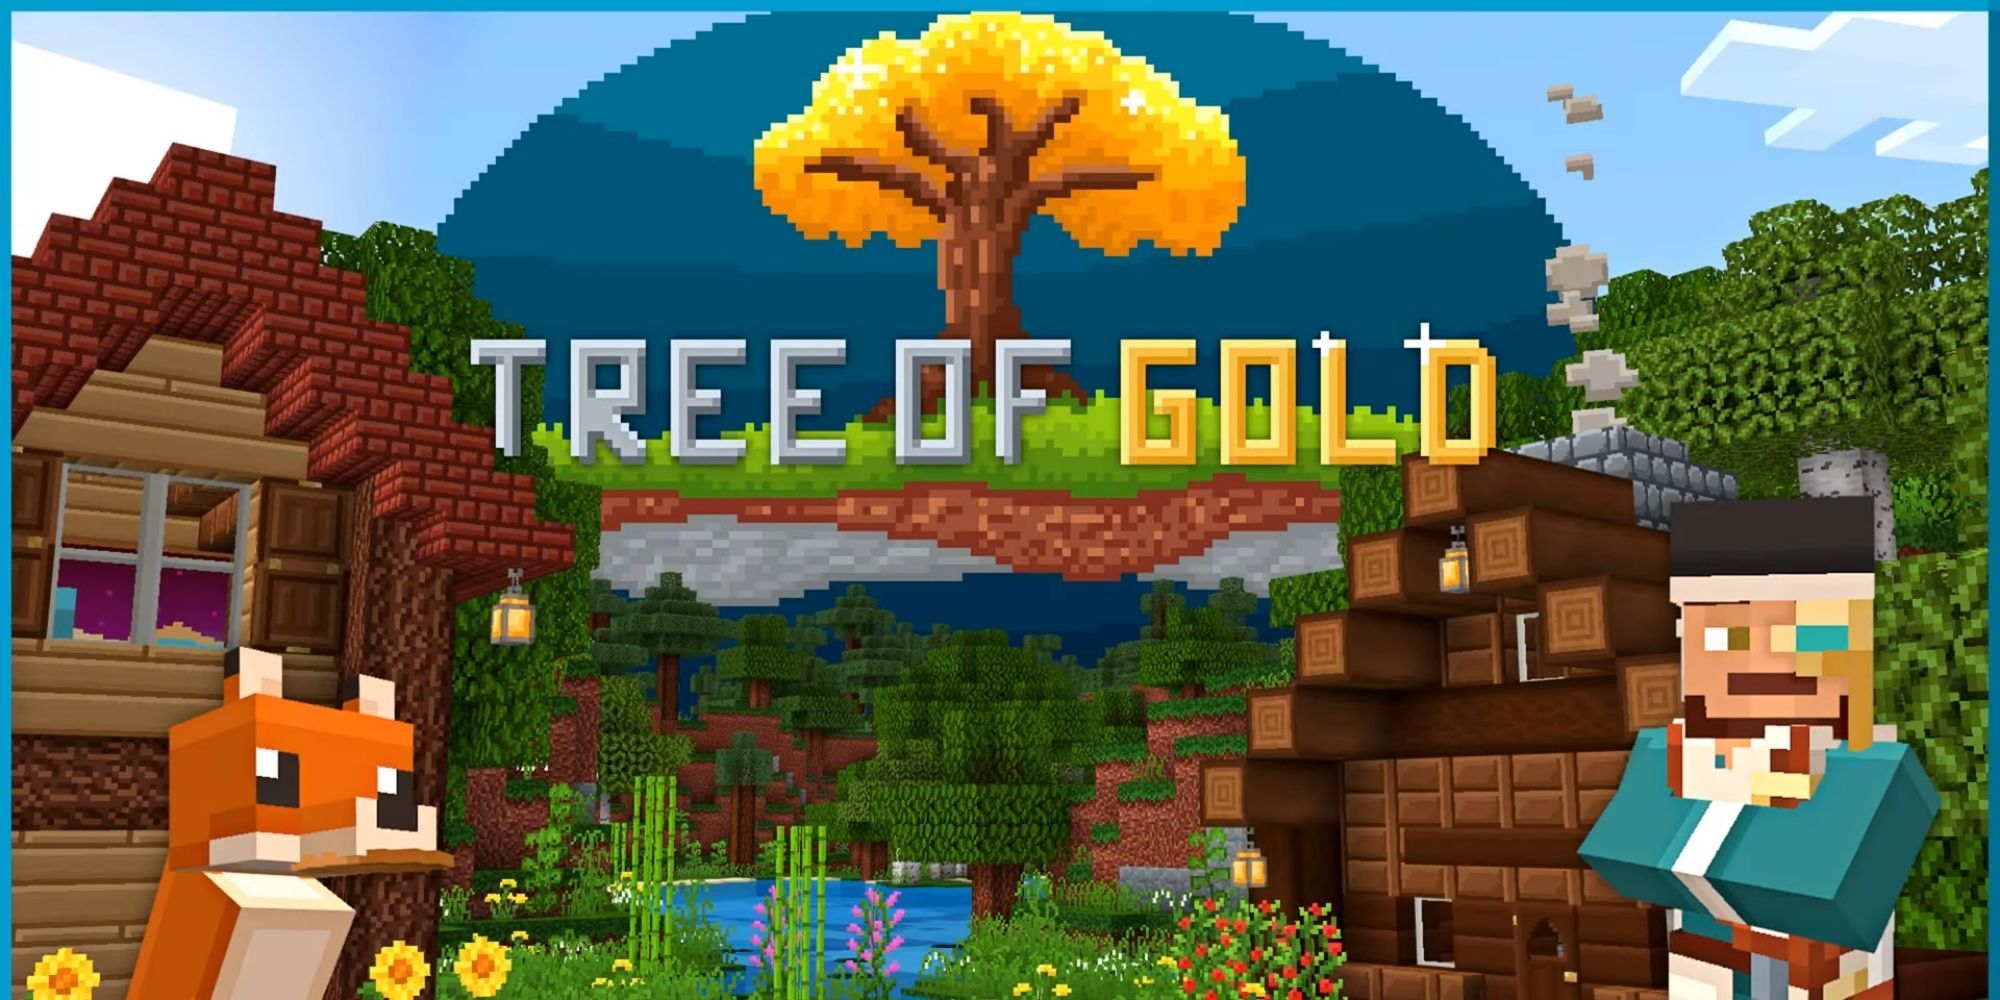 minecraft realms mobs houses and environment with Tree of Gold textures